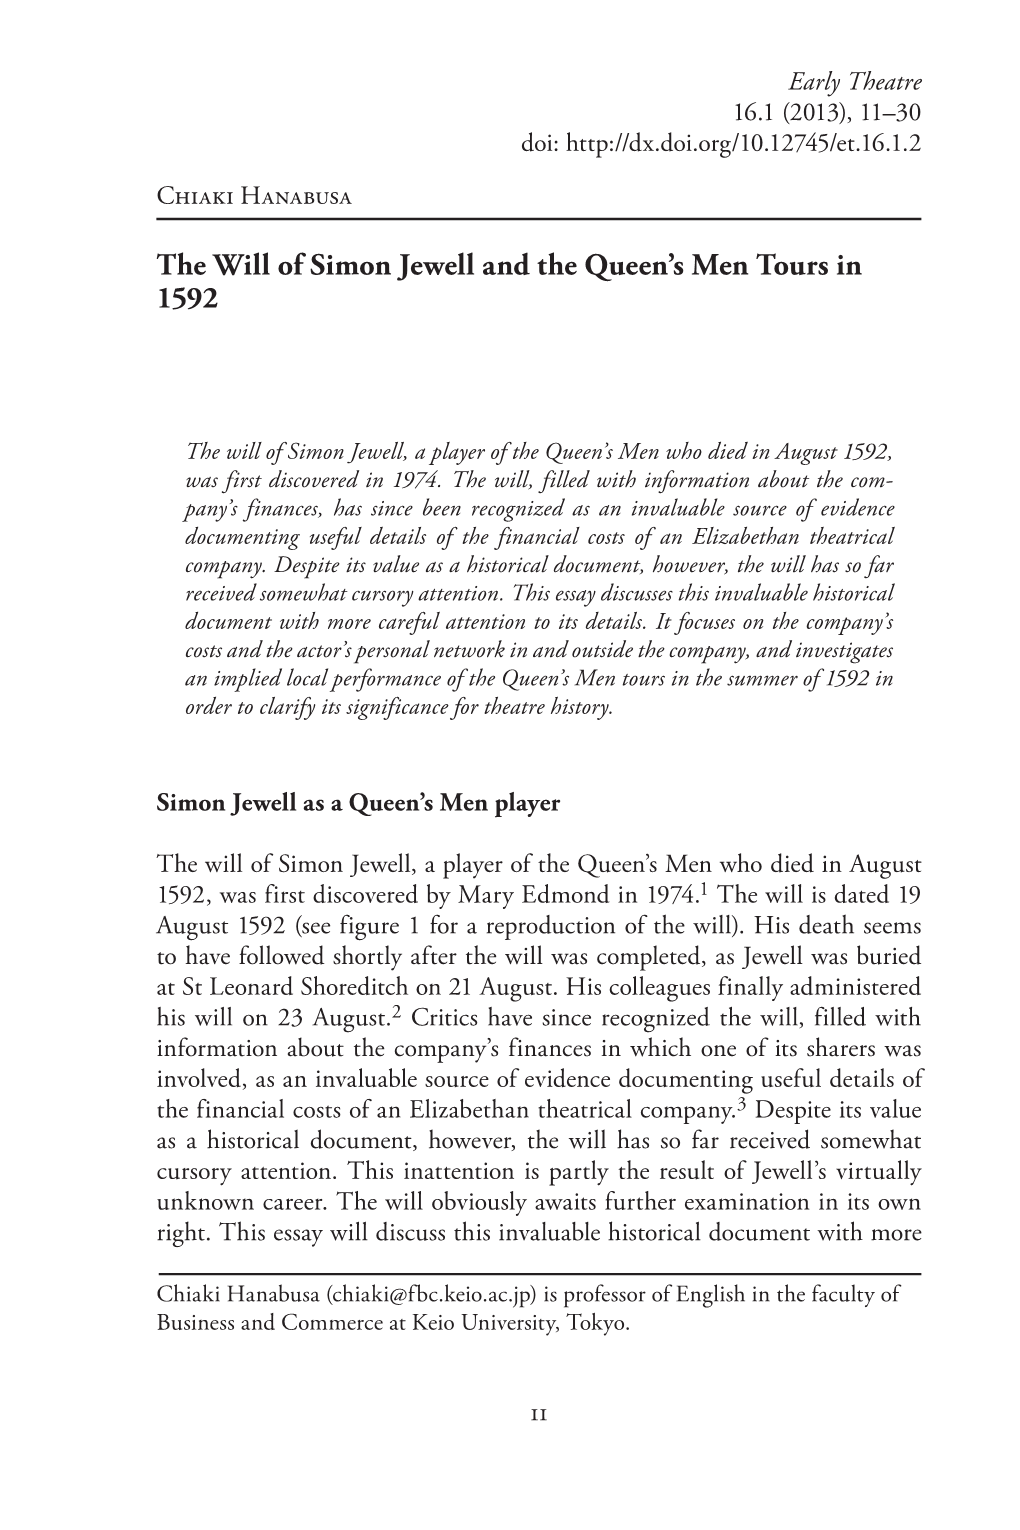 The Will of Simon Jewell and the Queen's Men Tours in 1592